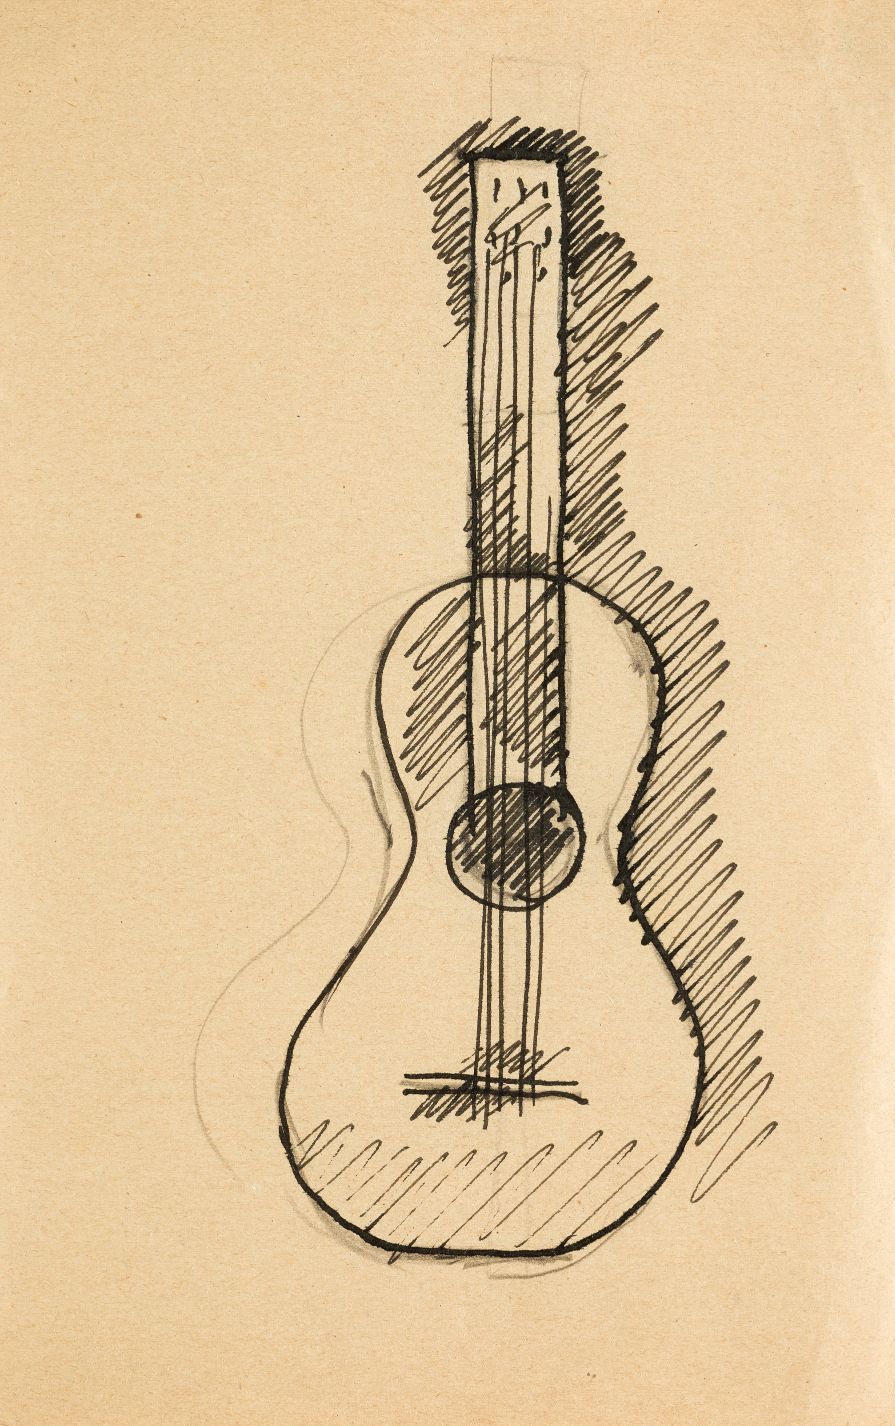 JOAQUIN TORRES GARCIA (1874 / 1949) "Guitar" Attached is a certificate signed by&hellip;